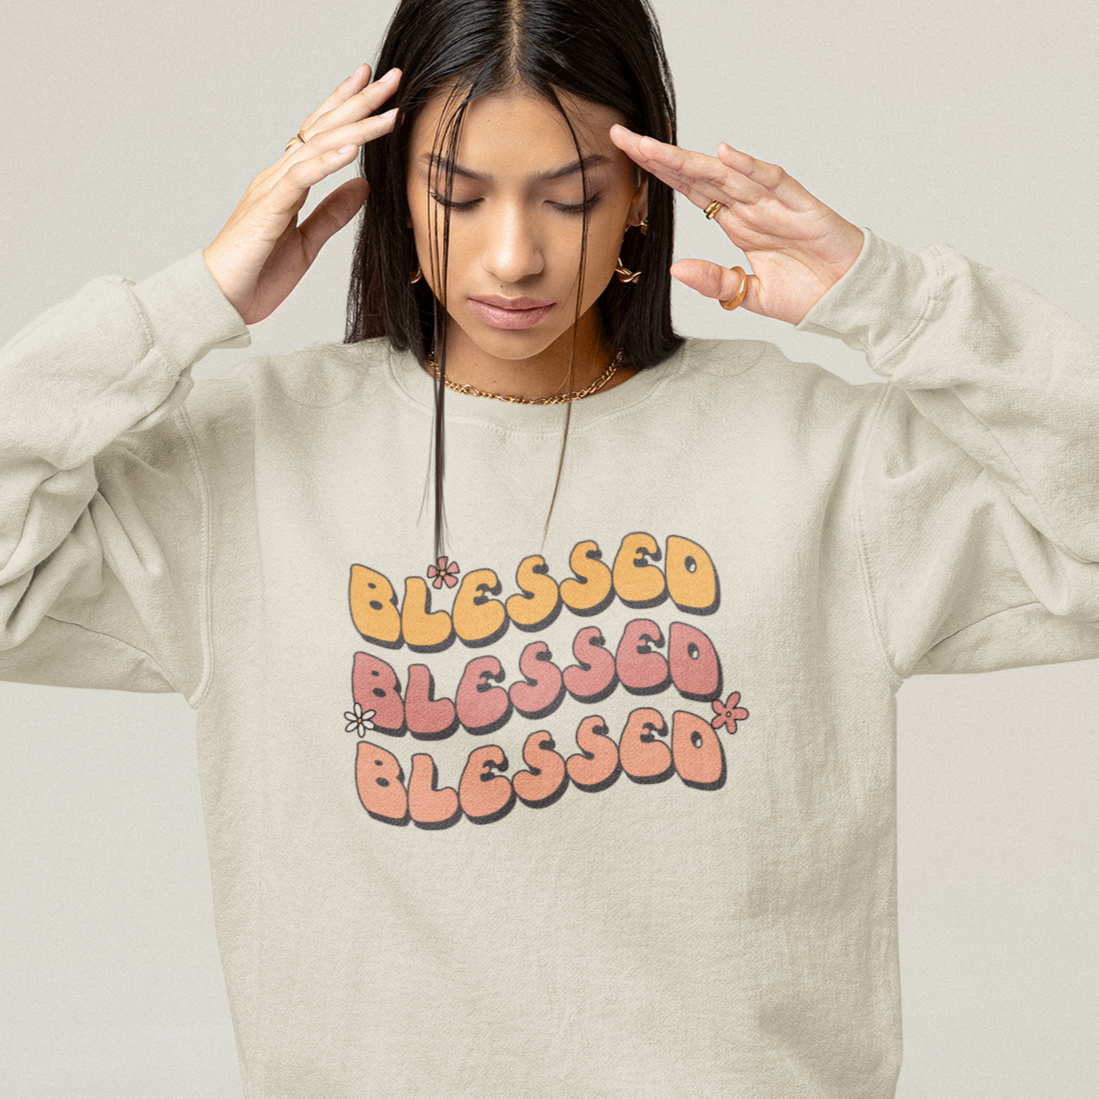 Blessed - Full Color Heat Transfer